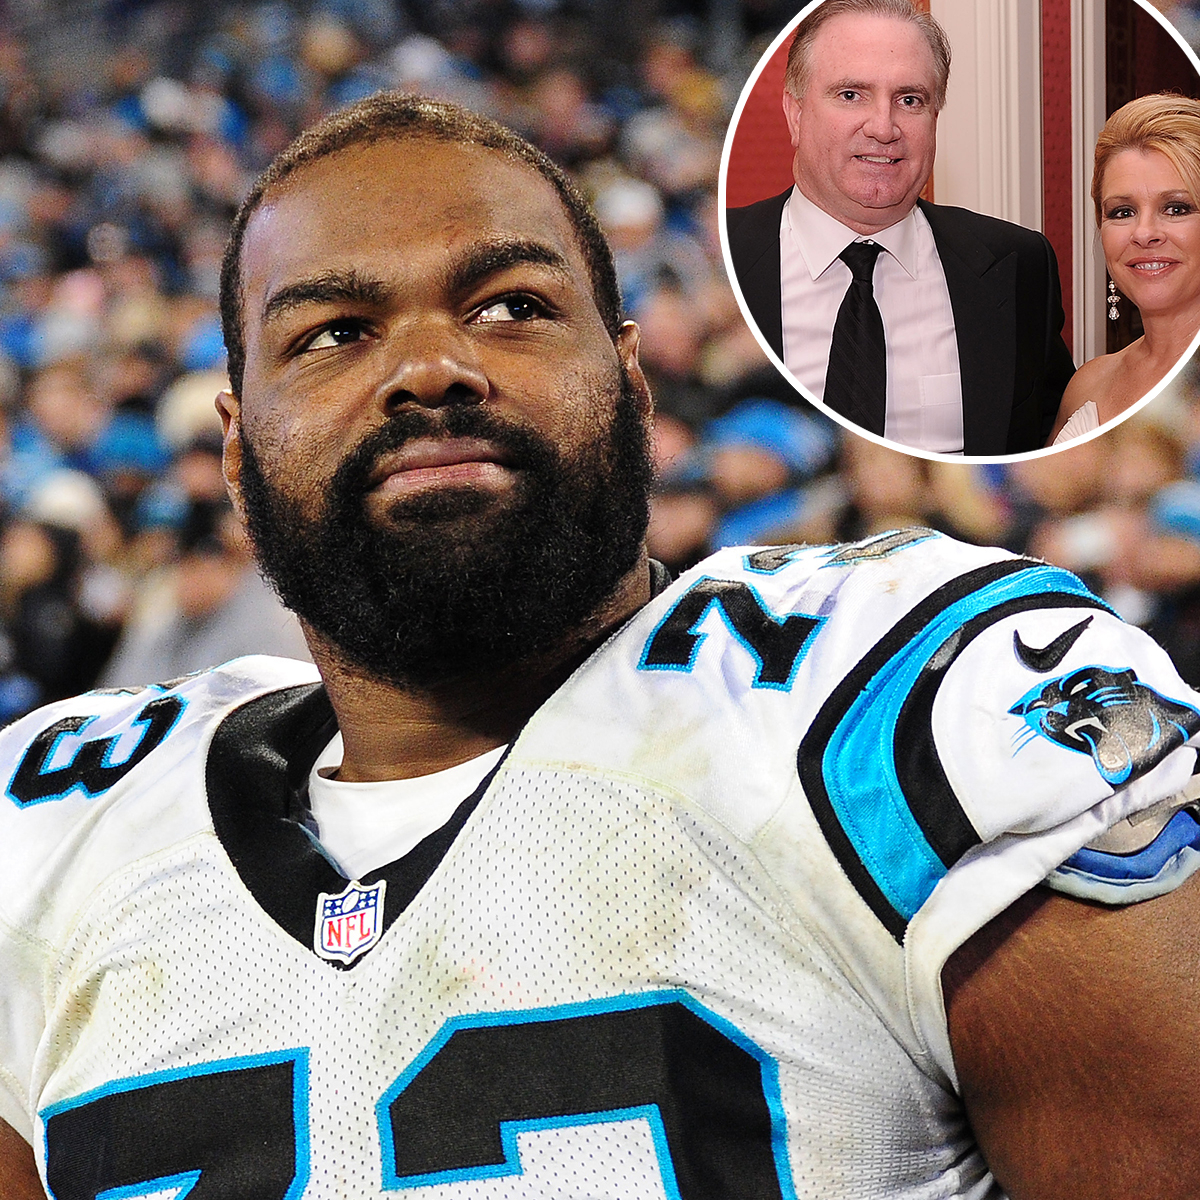 Sean and Leigh Anne Tuohy to End Michael Oher Conservatorship